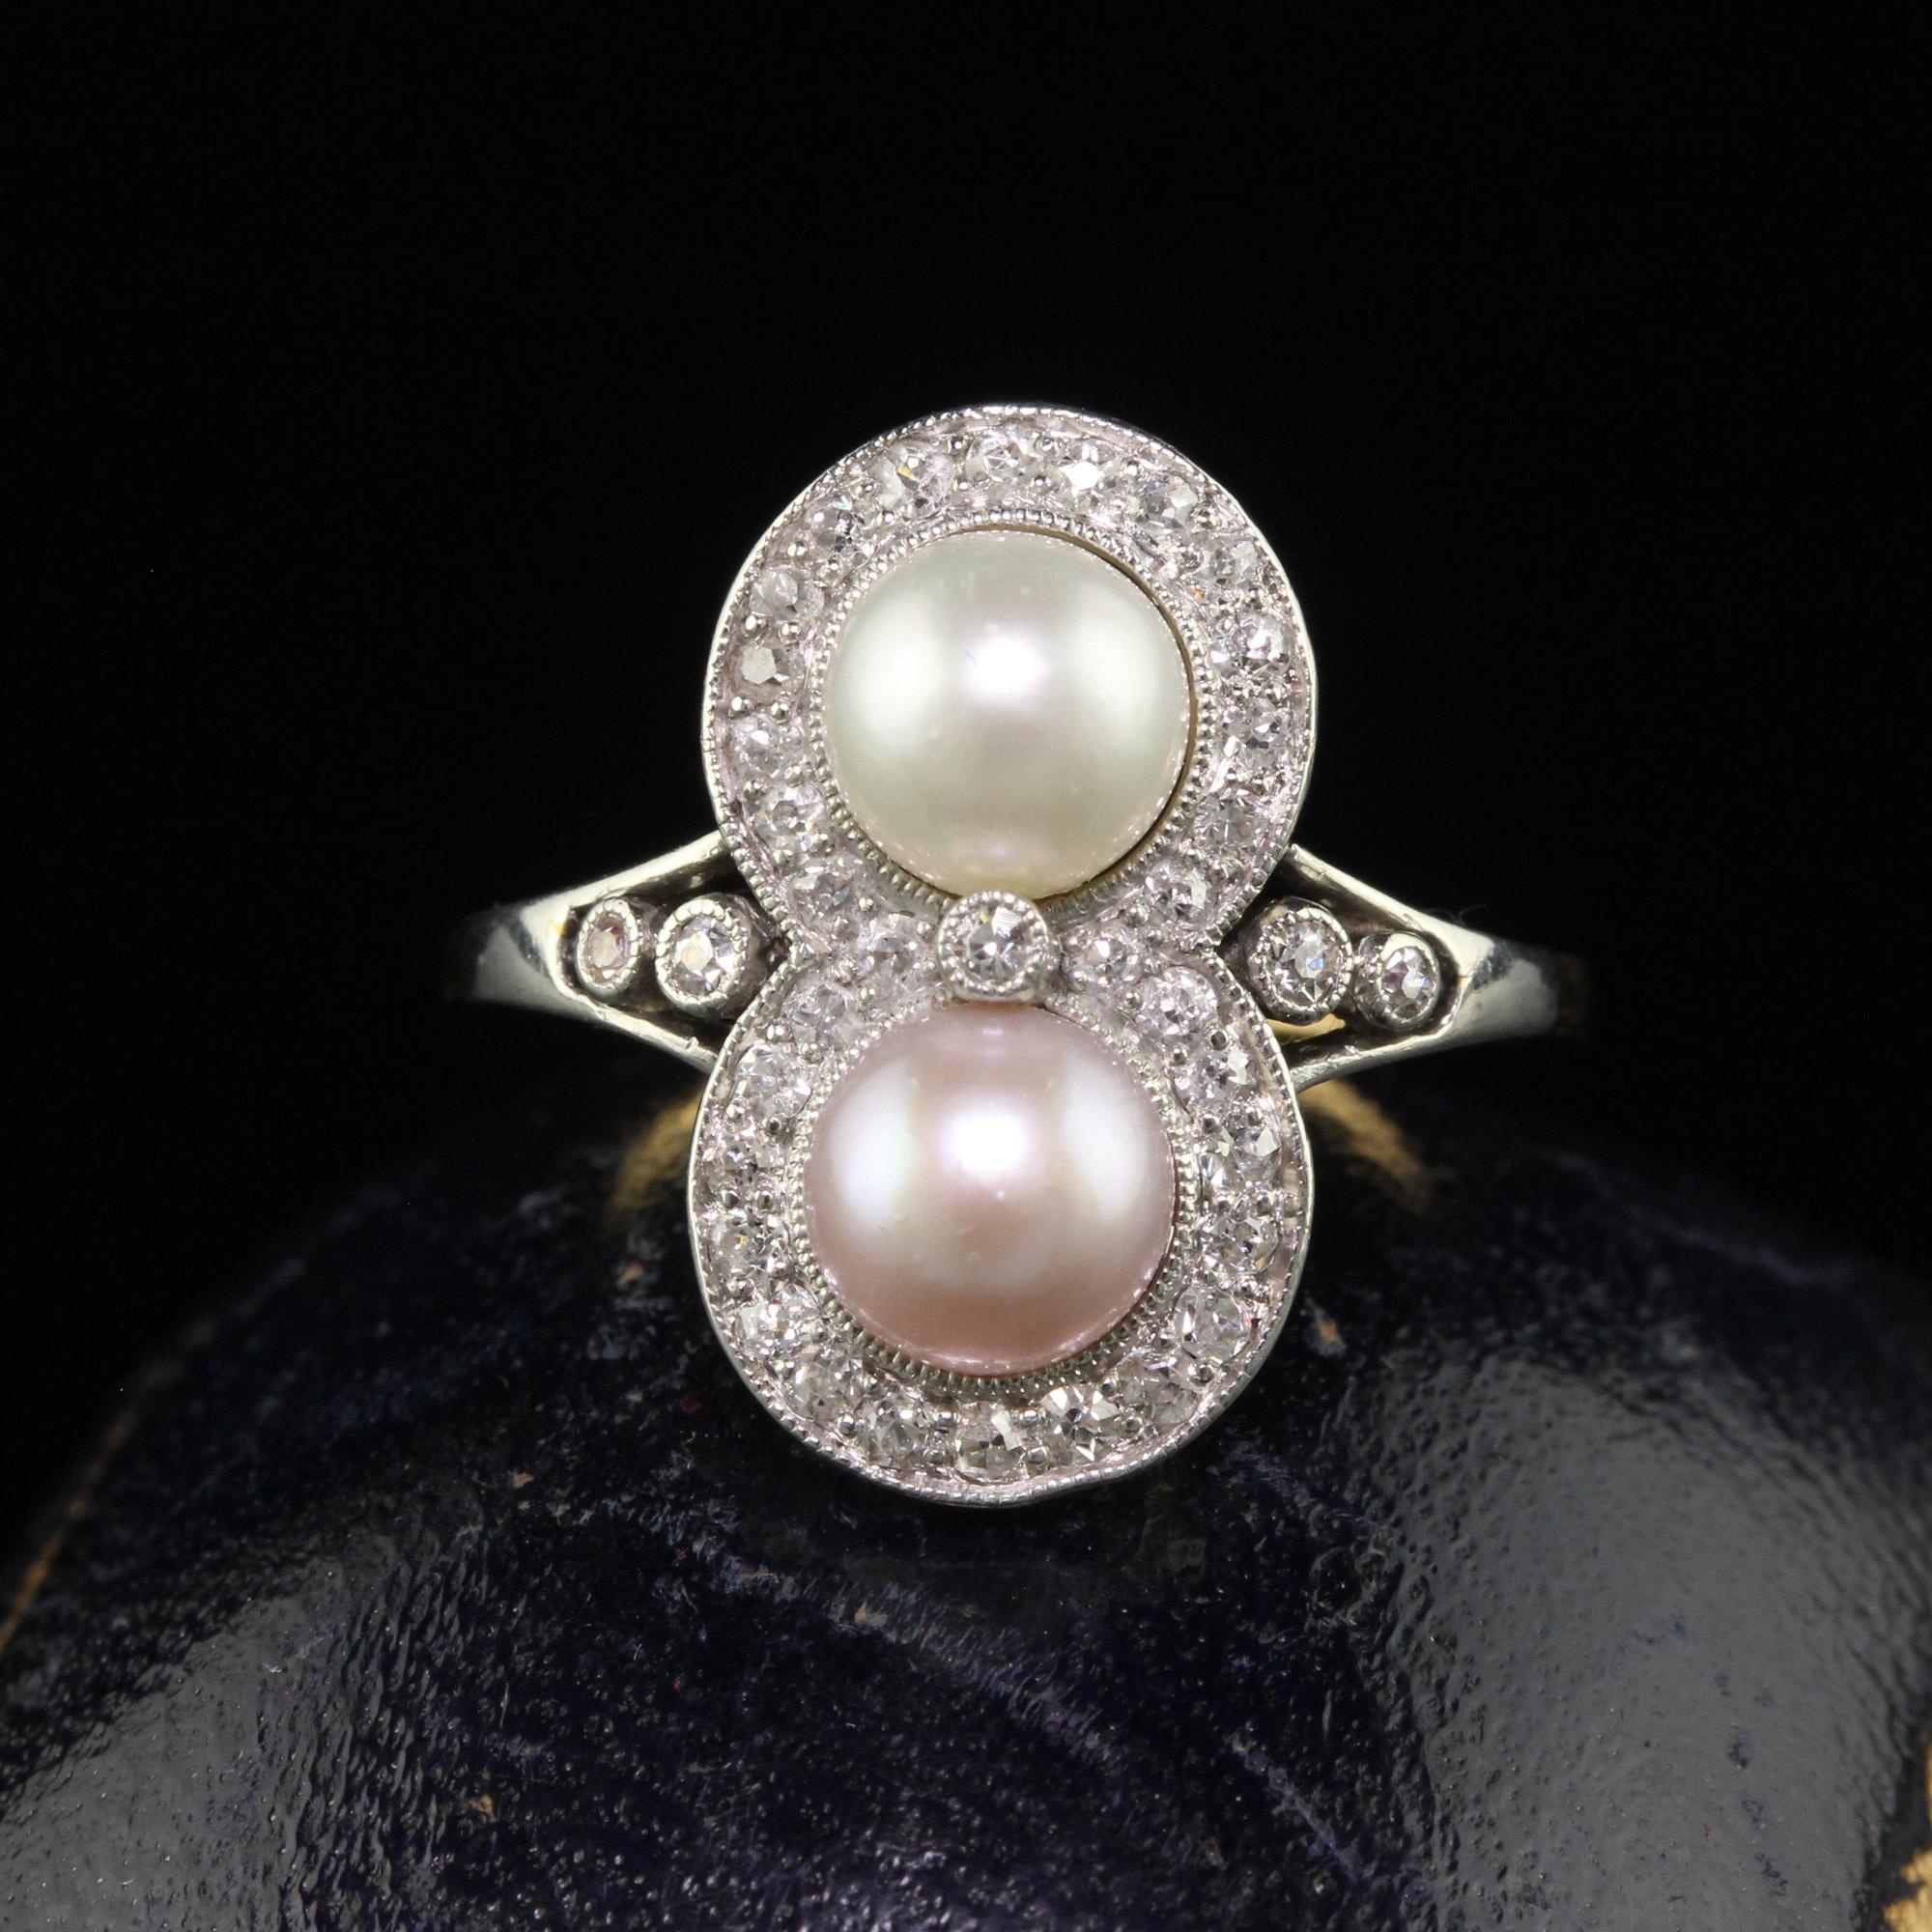 Beautiful Antique Edwardian 18K Yellow Gold Platinum Natural Pearl Toi et Moi Ring - GIA. This incredible Toi et Moi ring is crafted in 18k yellow gold and platinum top. The ring holds natural pearls that have a GIA report. The pearls are surrounded